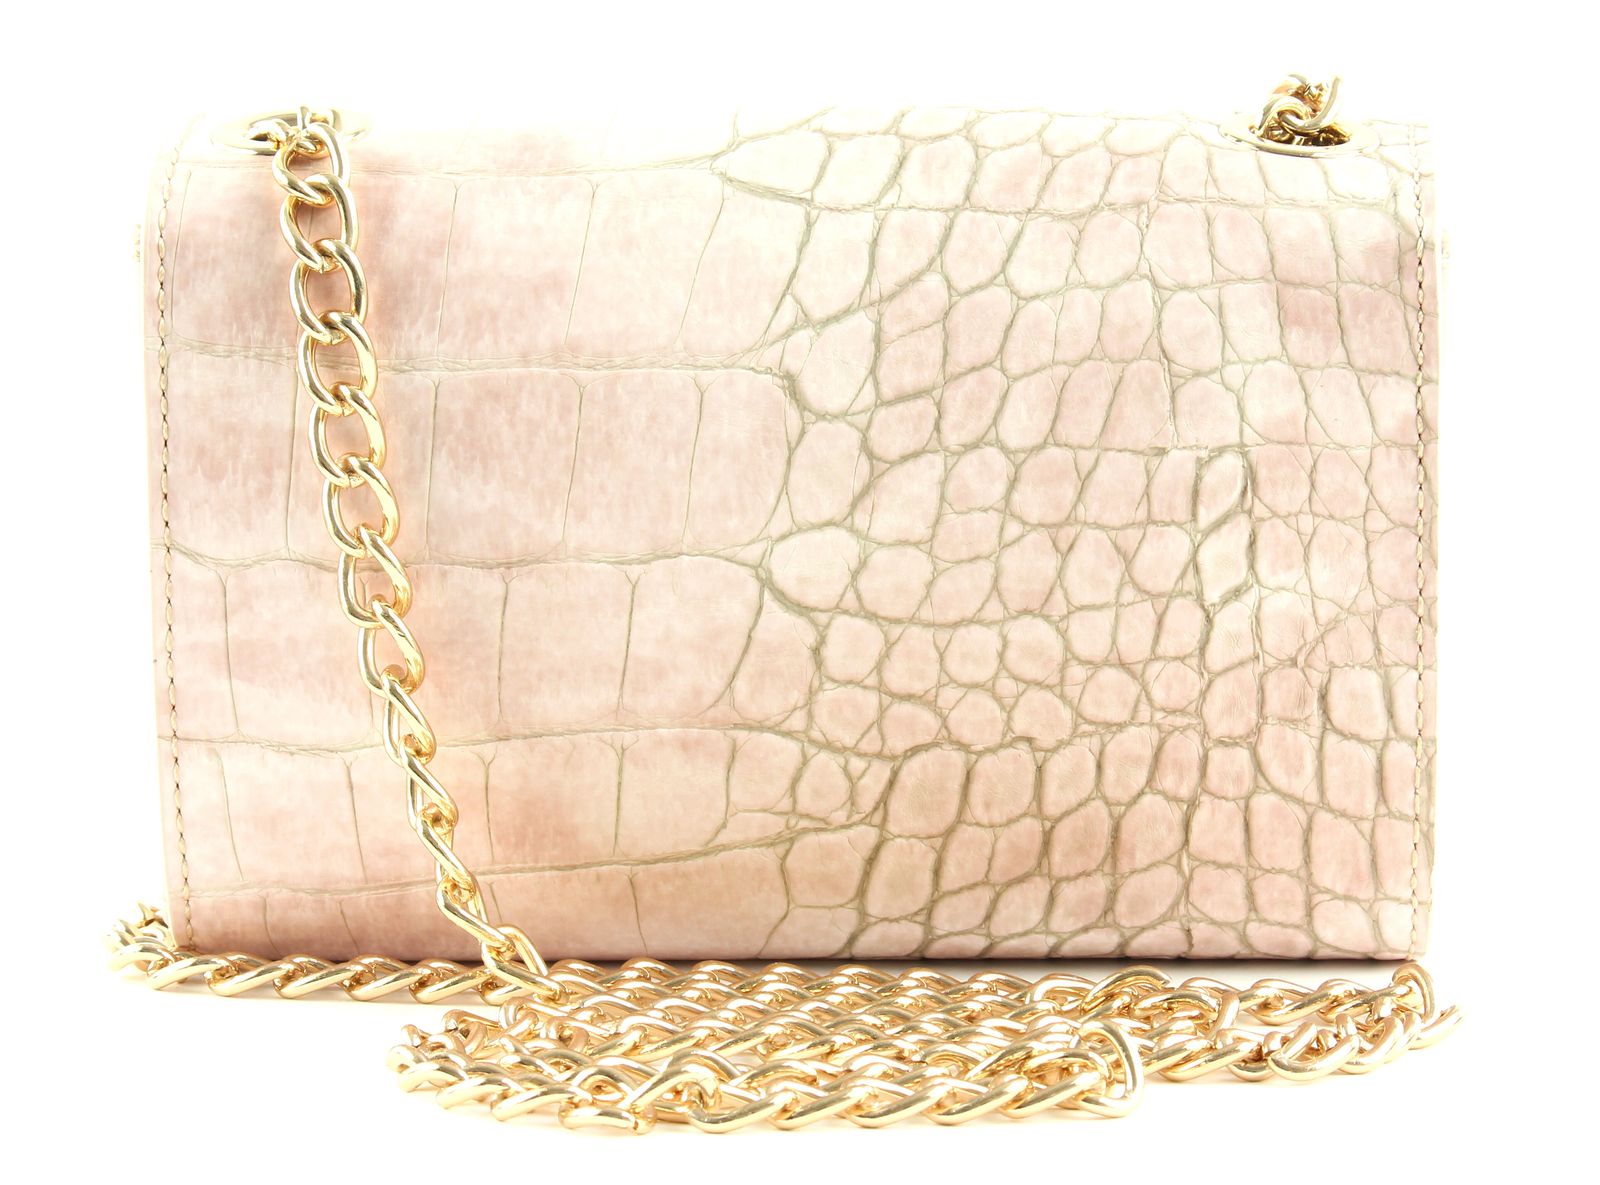 Audrey Embossed Leather Evening Bag